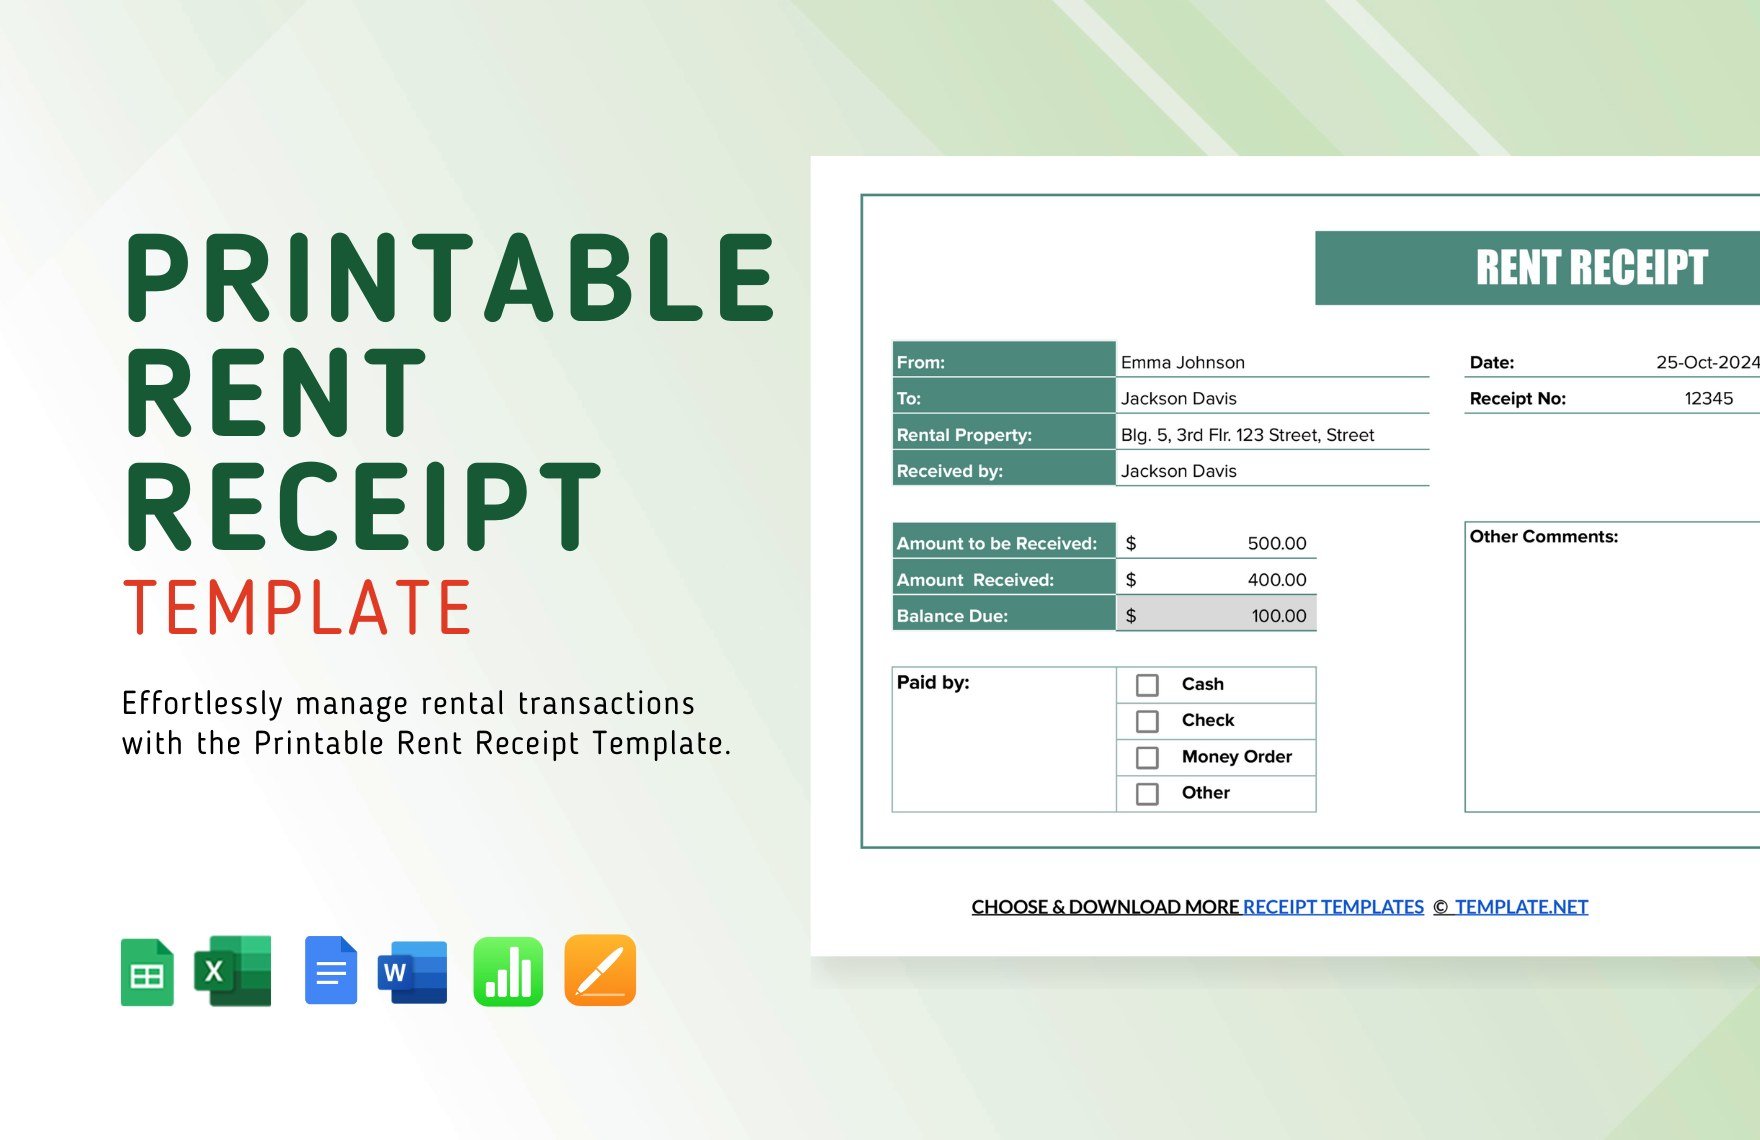 Printable Rent Receipt Template in Word, Google Docs, Excel, Google Sheets, Apple Pages, Apple Numbers